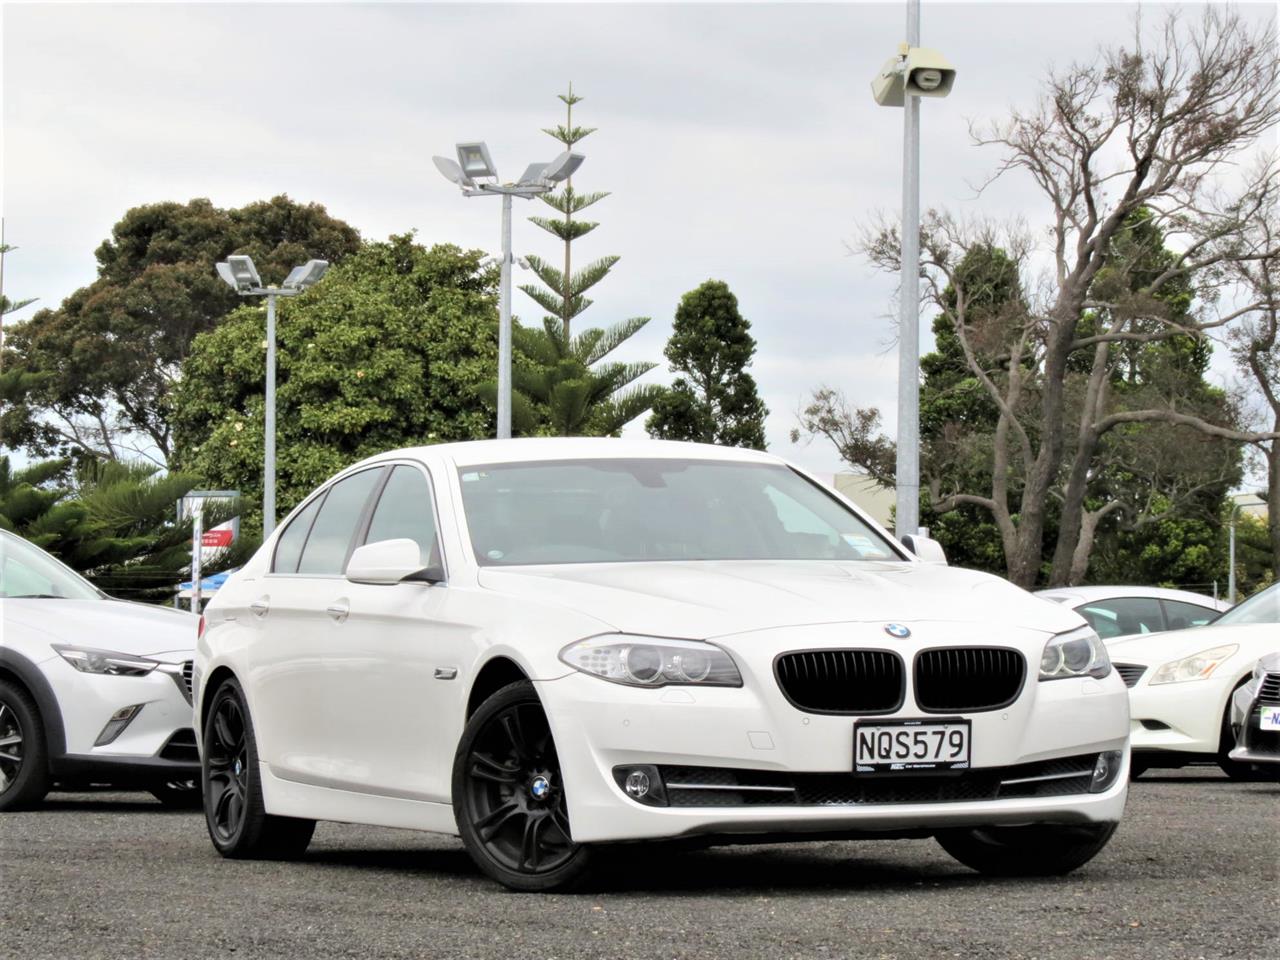 2012 BMW 520d only $59 weekly